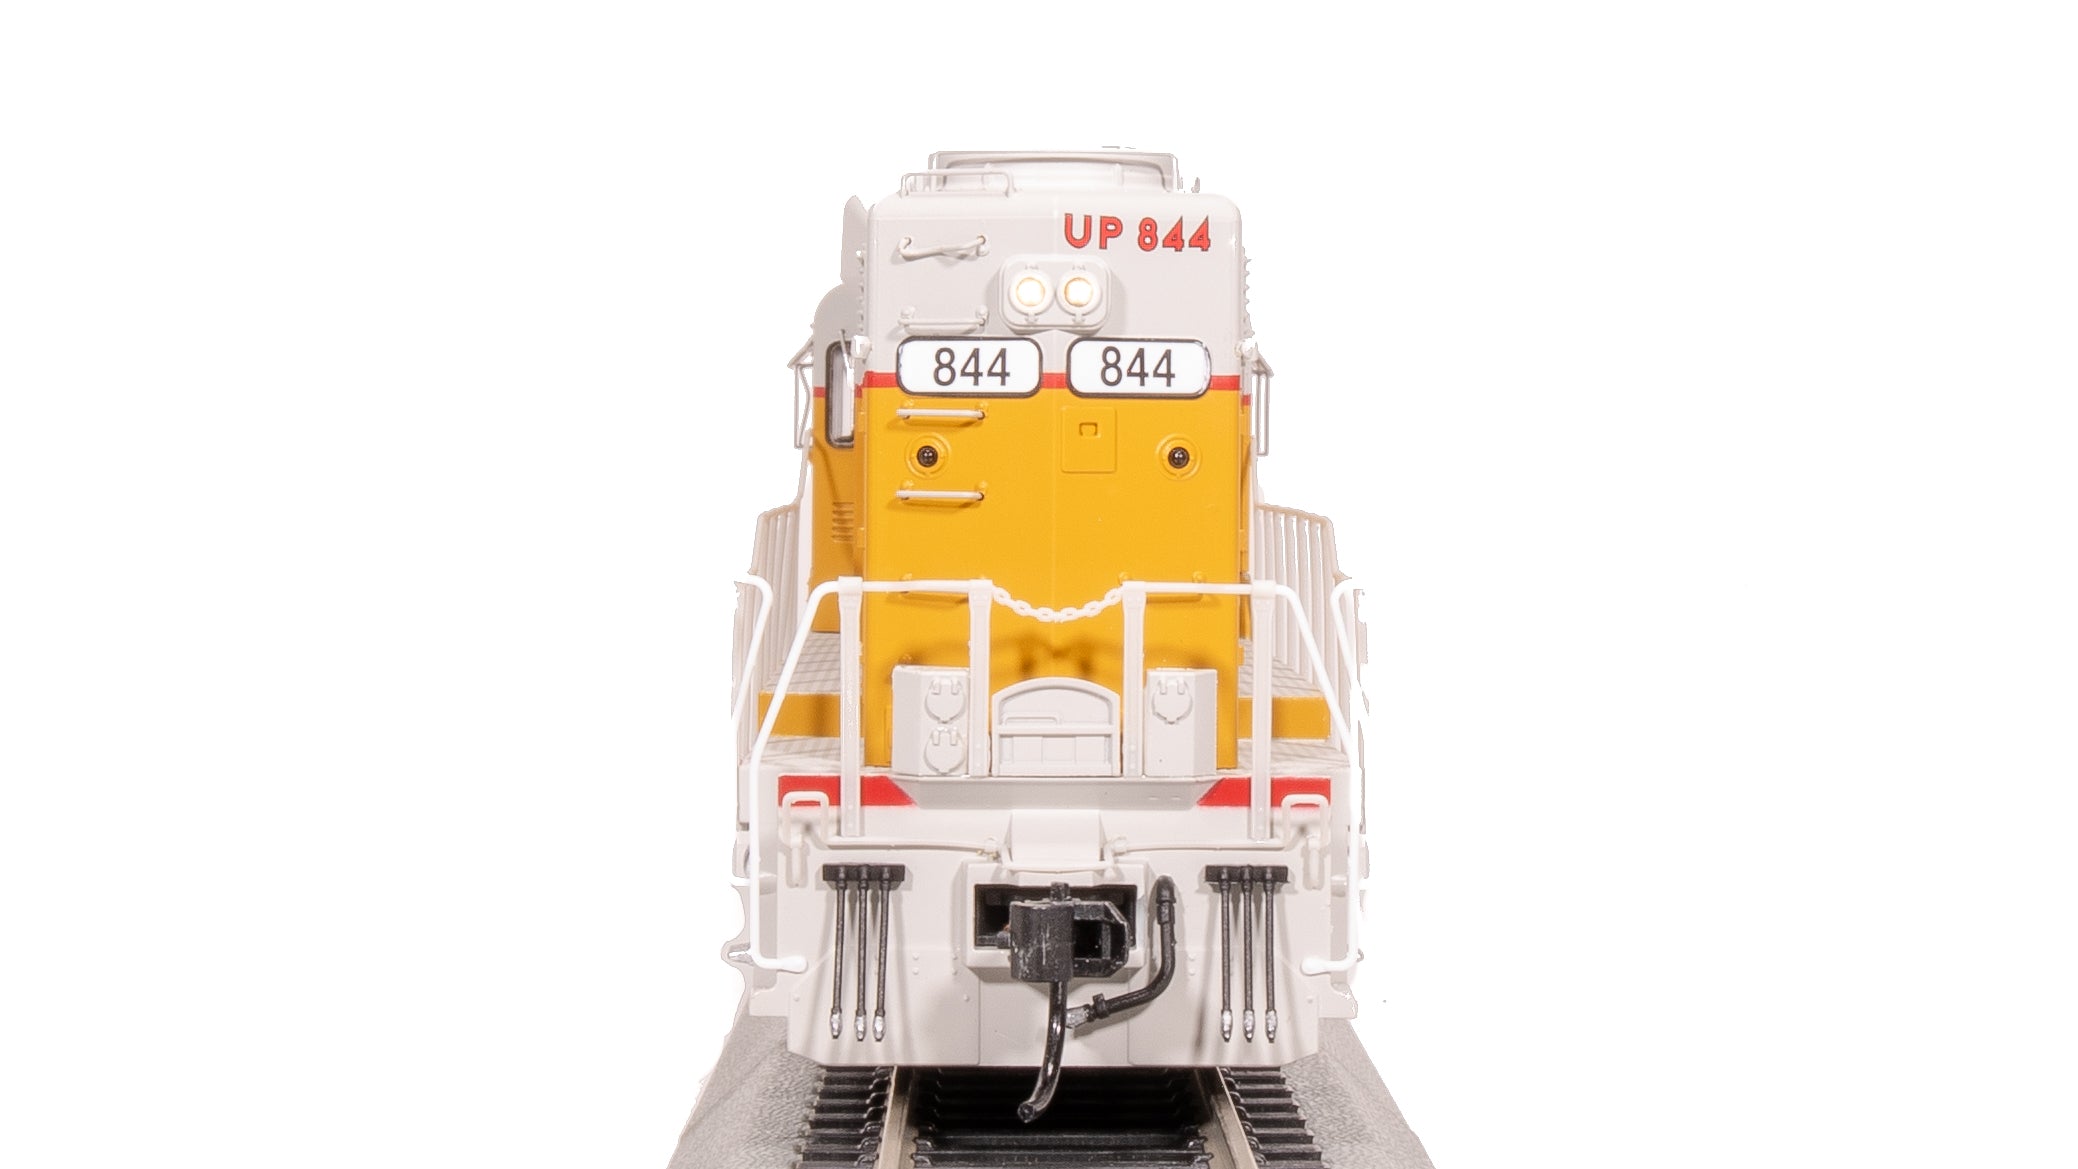 7580 EMD GP30, UP 844, As Appears Today, Paragon4 Sound/DC/DCC, HO